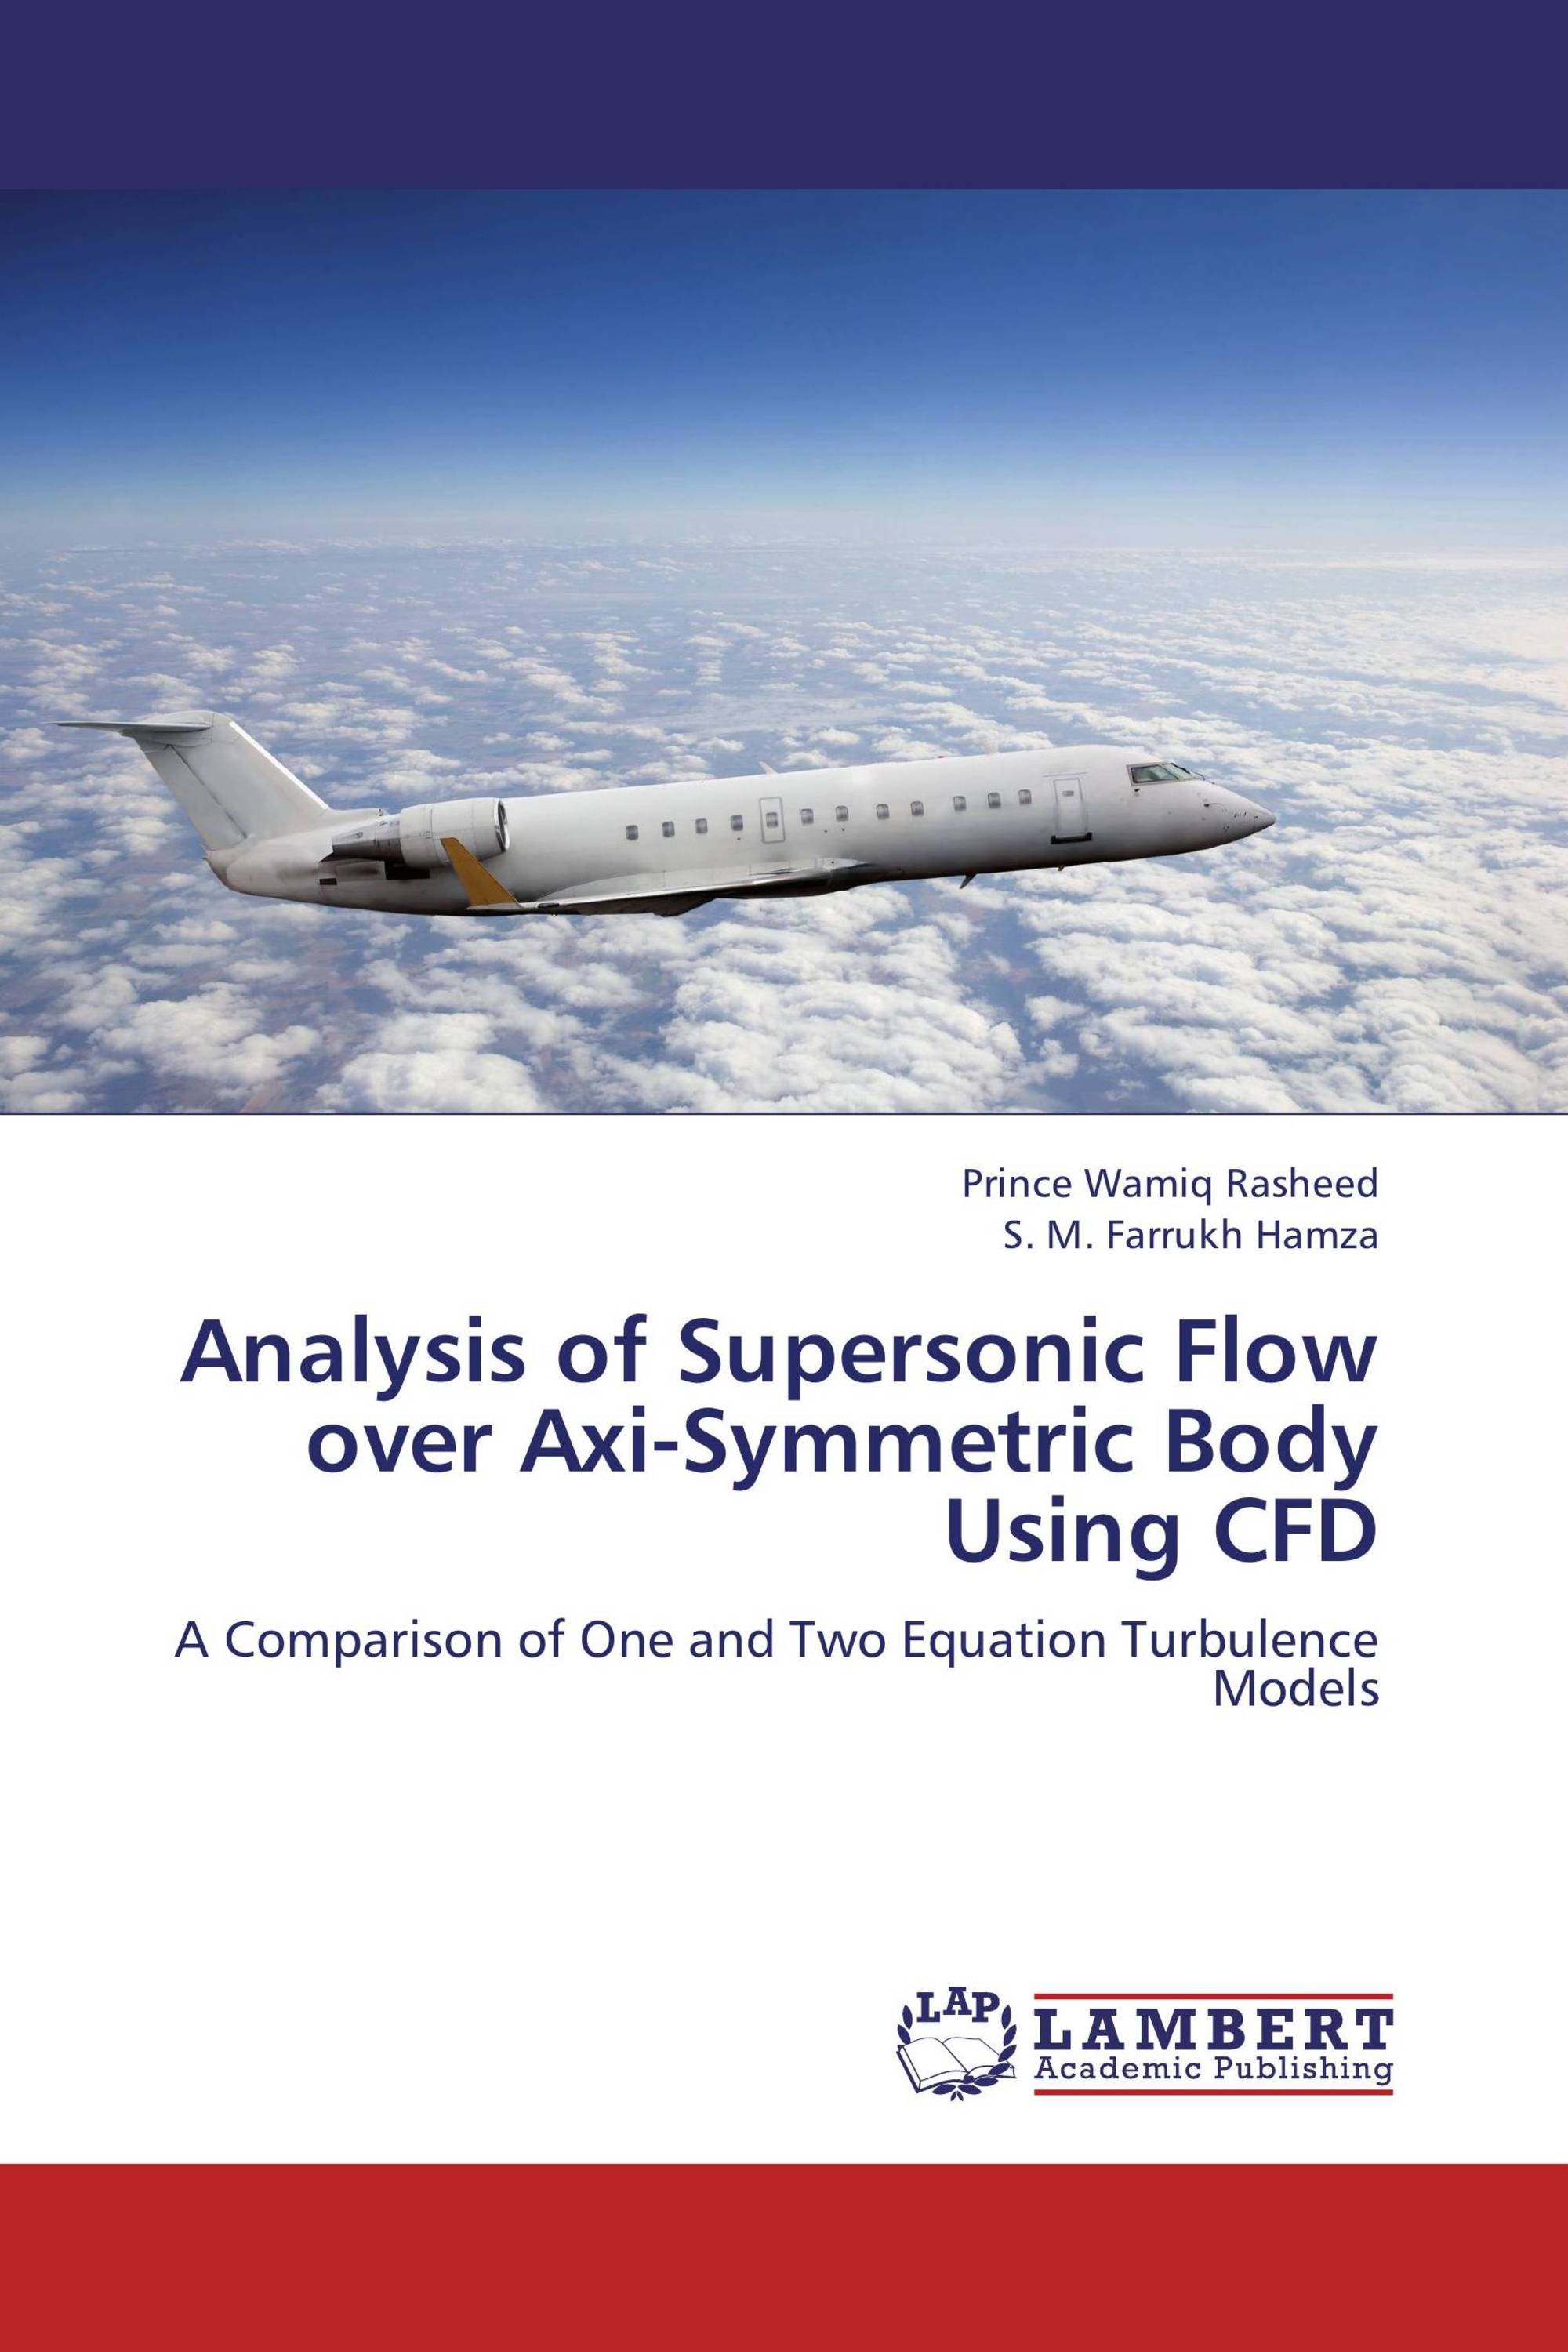 Analysis of Supersonic Flow over Axi-Symmetric Body Using CFD